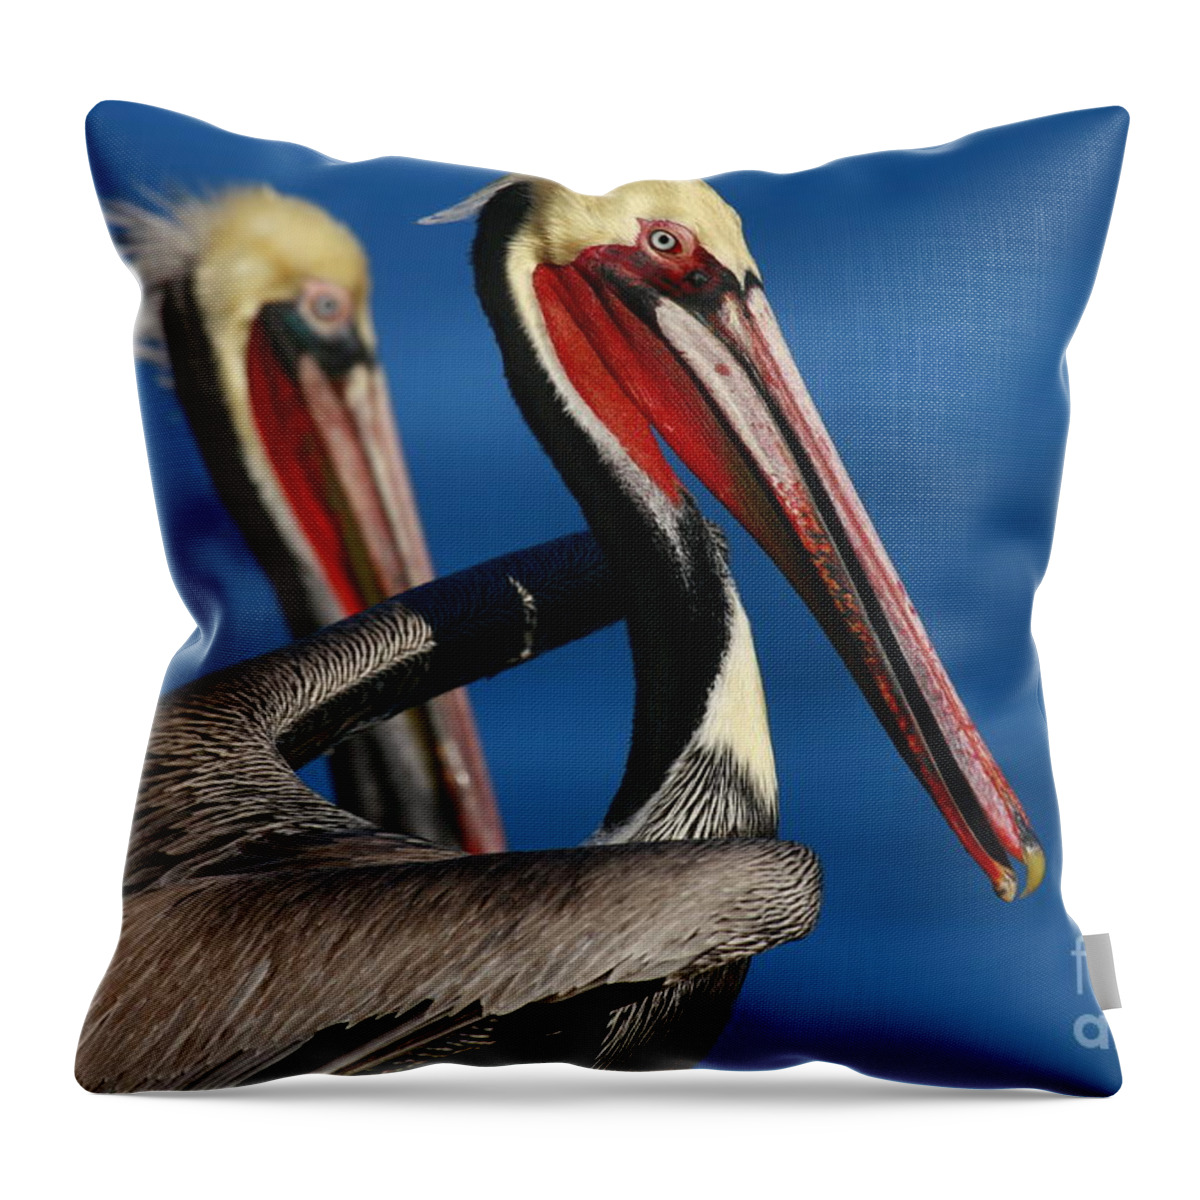 Landscapes Throw Pillow featuring the photograph La Jolla Pelicans In Waves by John F Tsumas